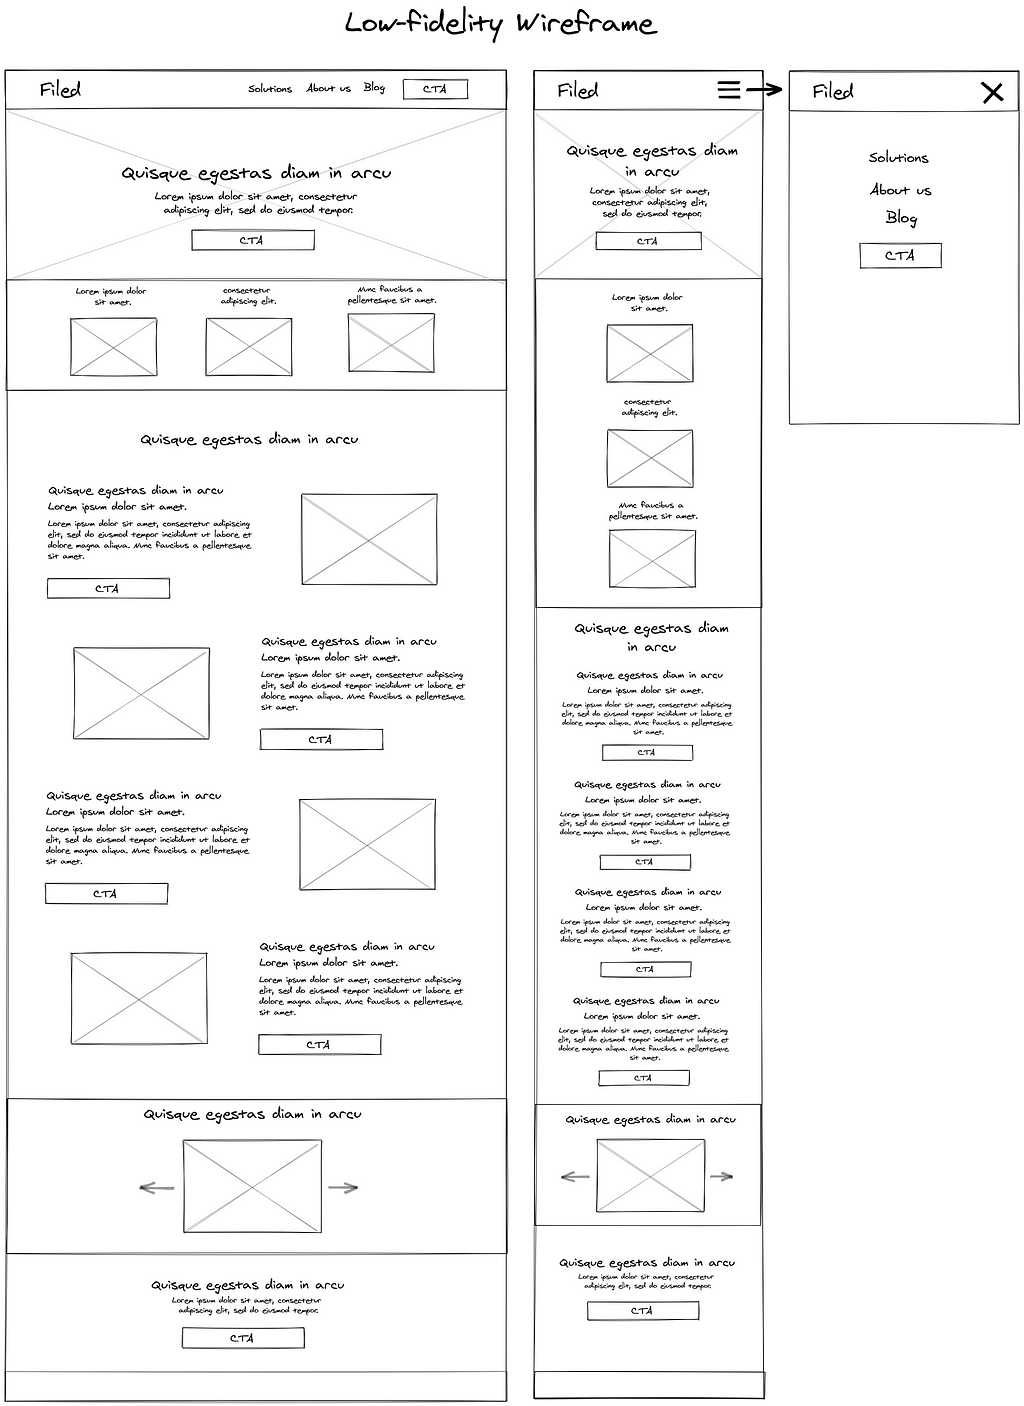 Full low-fidelity wireframes of proposed layout for desktop, mobile, and the mobile burger menu.